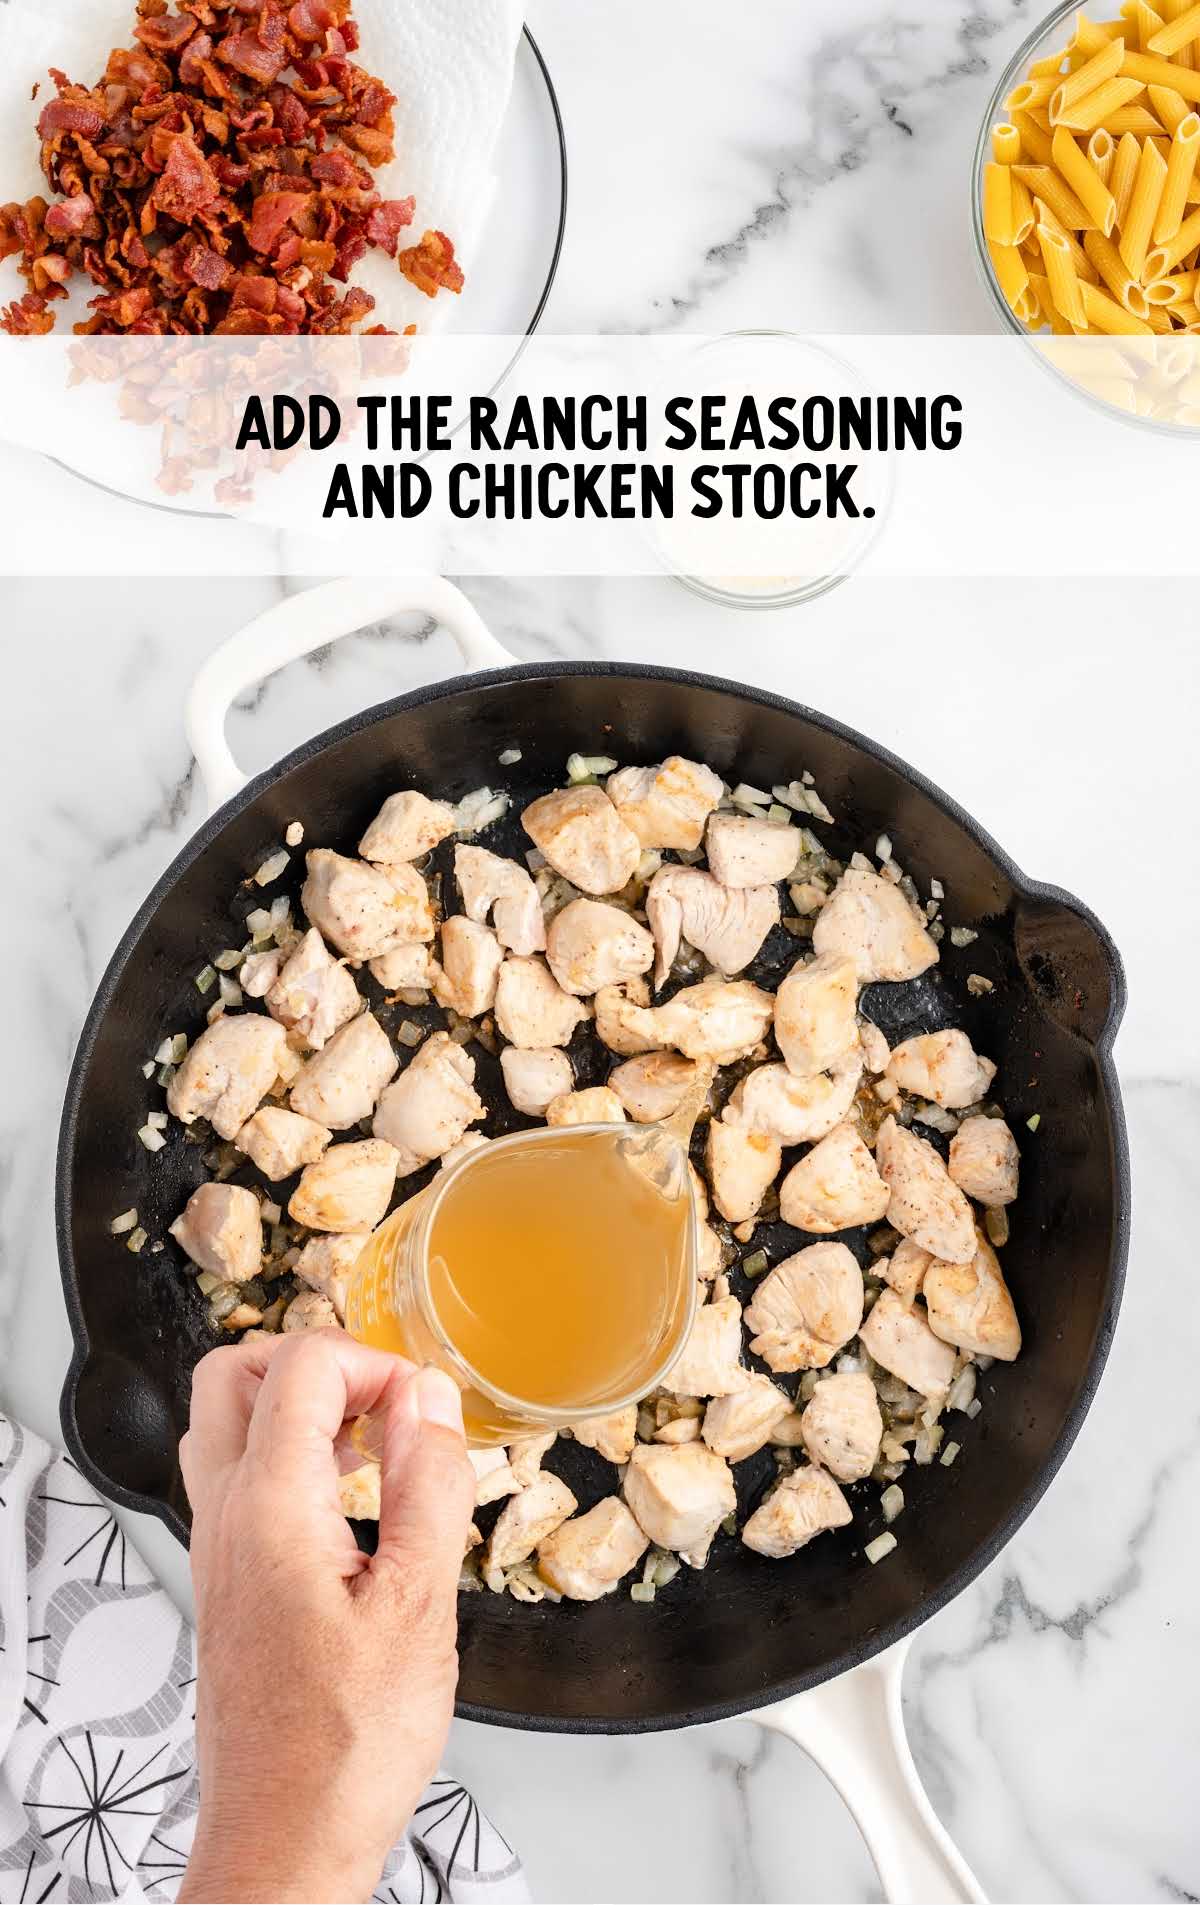 ranch seasonings and chicken stock added to the skillet